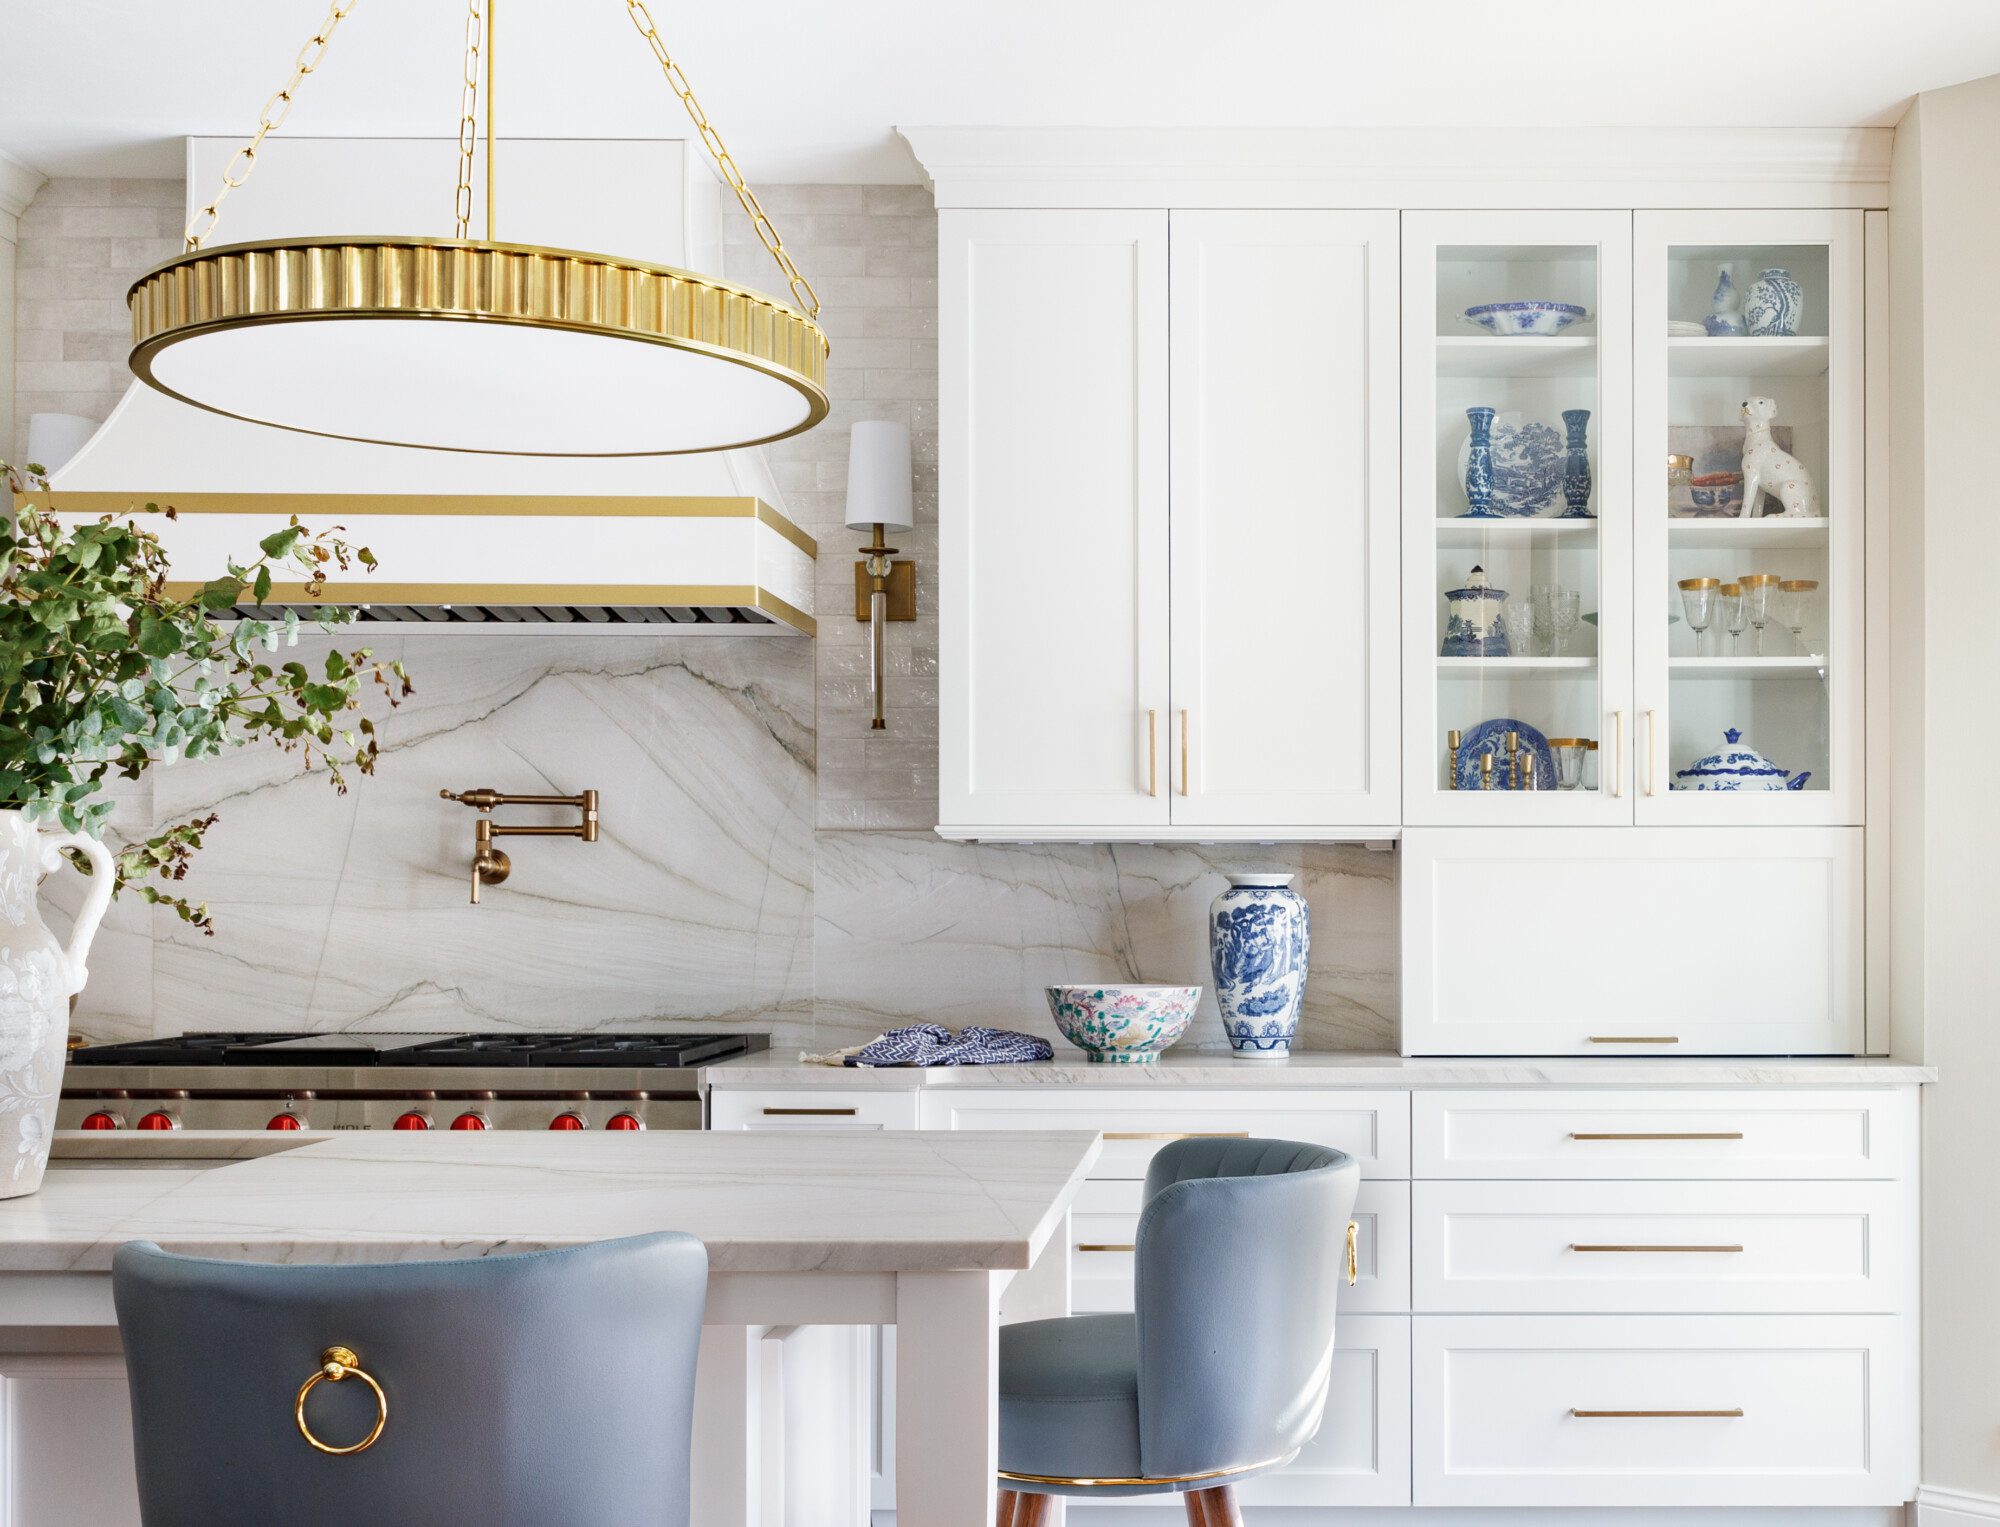 white cabinets and gold accents create a glam kitchen